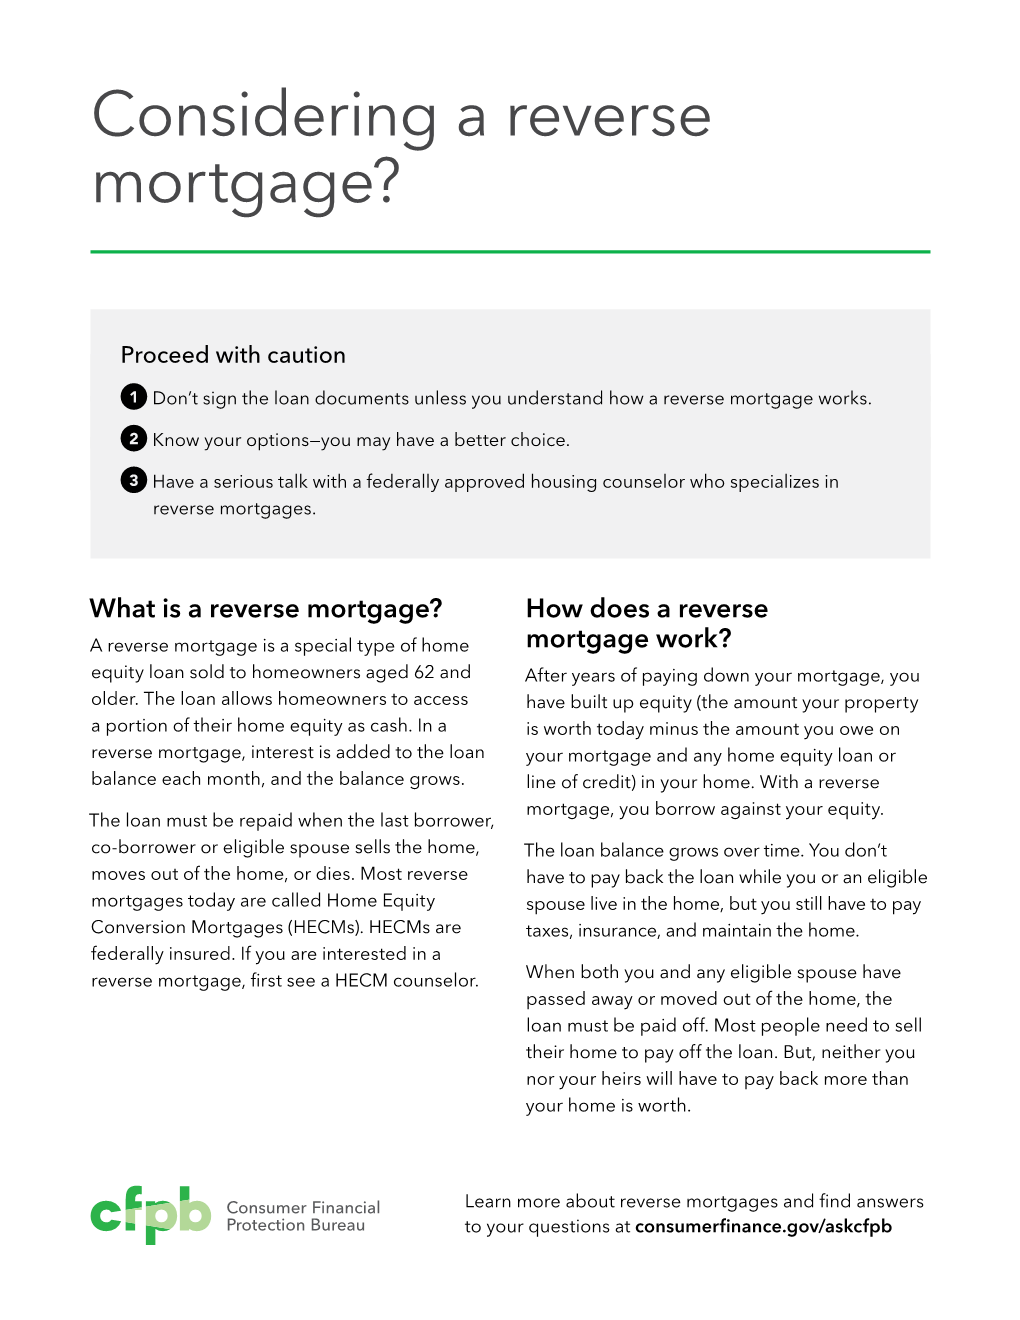 Considering a Reverse Mortgage?